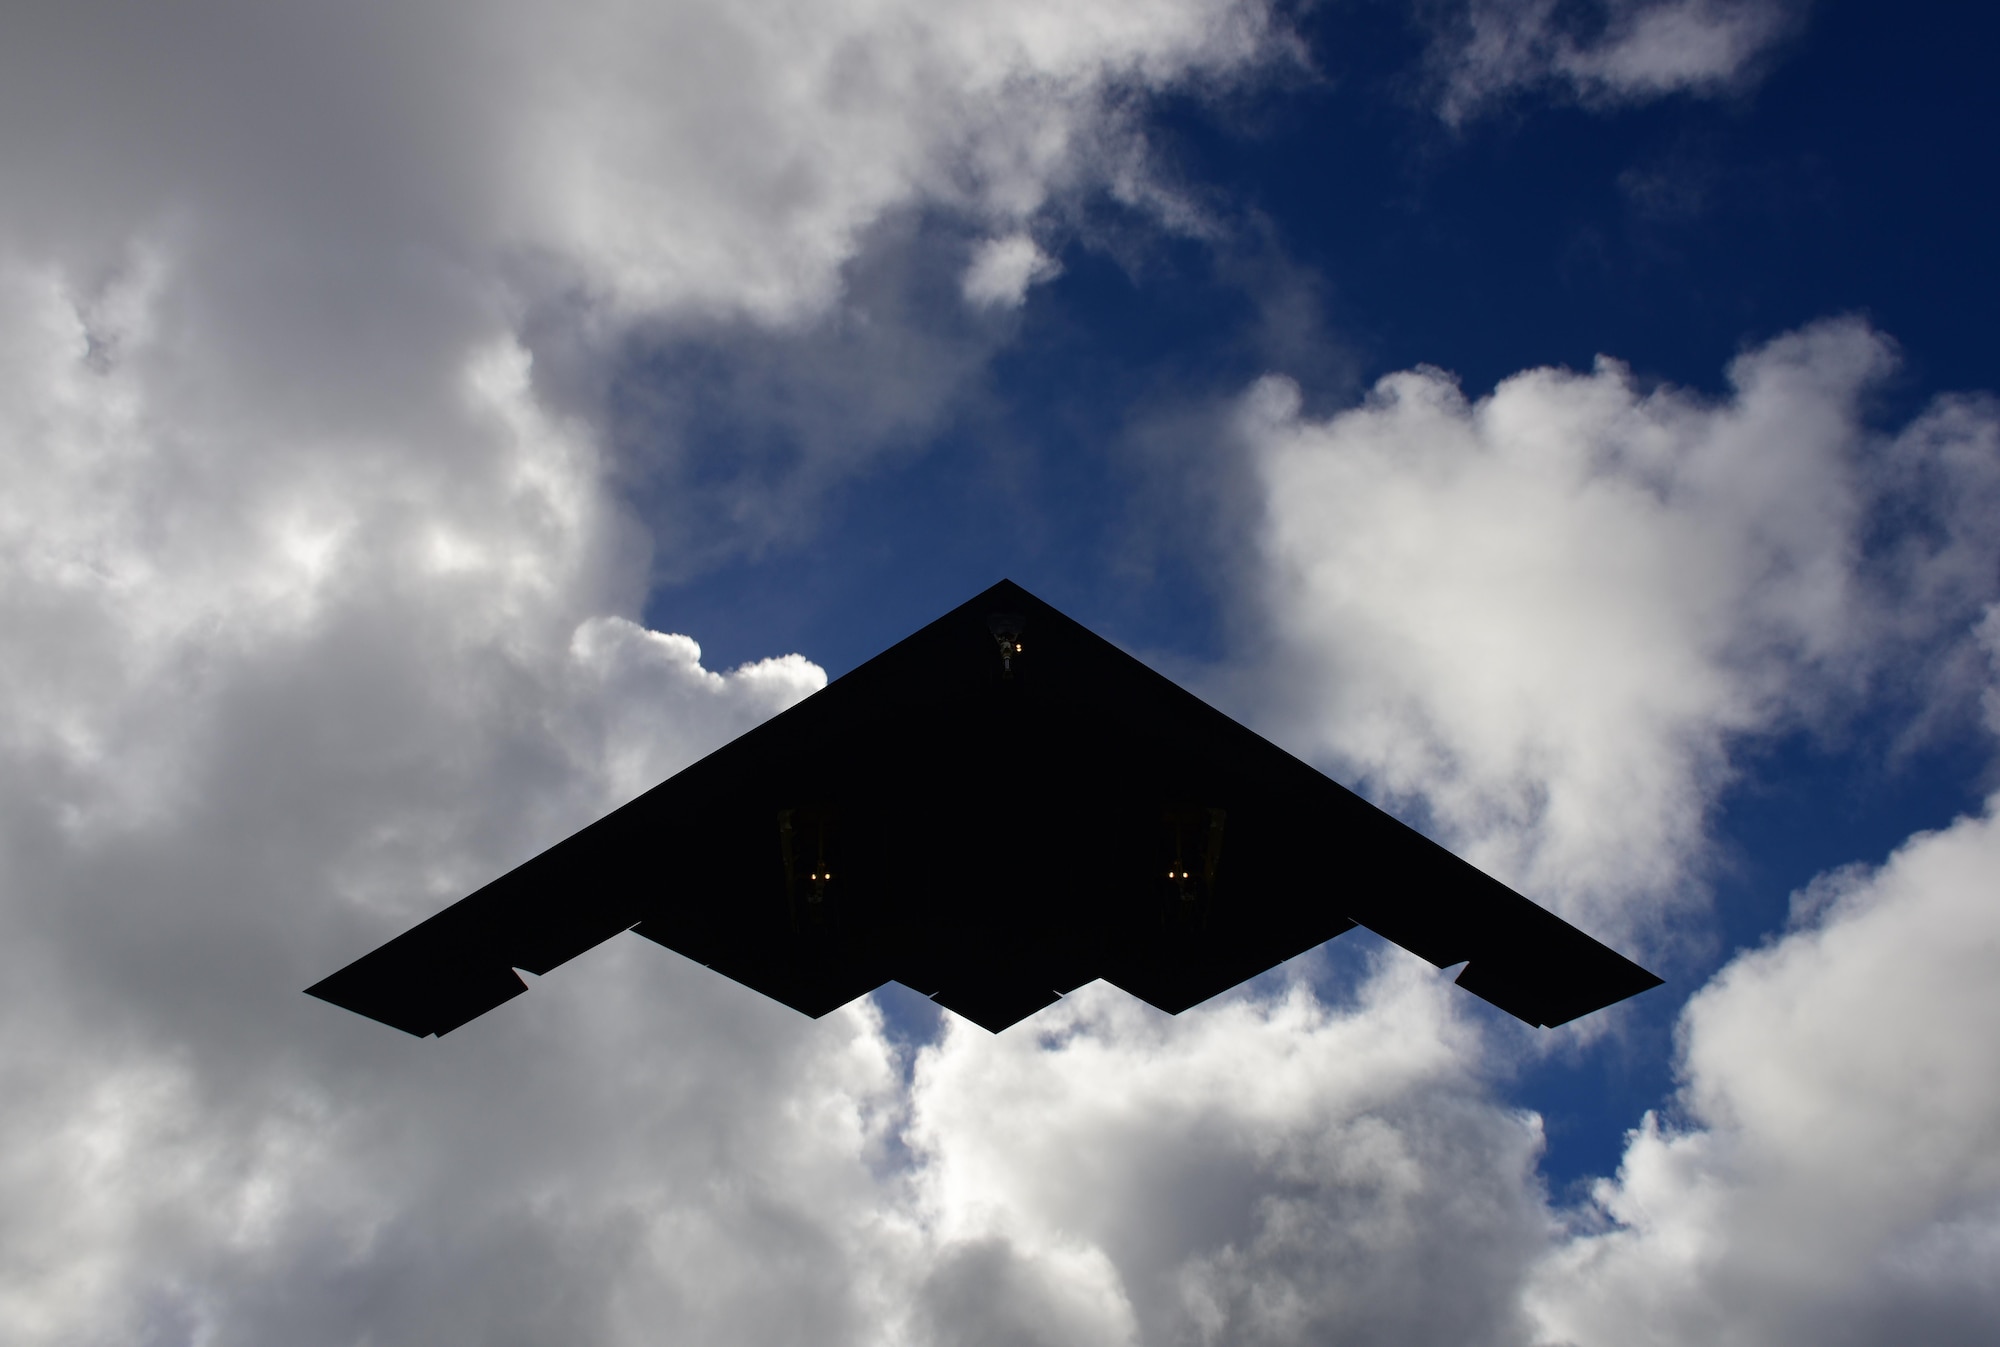 A U.S. Air Force B-2 Spirit deployed from Whiteman Air Force Base, Mo., flies overhead after returning from a local training mission at Andersen Air Force Base, Guam, Jan. 12, 2017. The B-2's low-observable, or "stealth," characteristics give it the ability to penetrate an enemy's most sophisticated defenses and threaten heavily defended targets while avoiding adversary detection, tracking and engagement. (U.S. Air Force photo by Airman 1st Class Jazmin Smith)